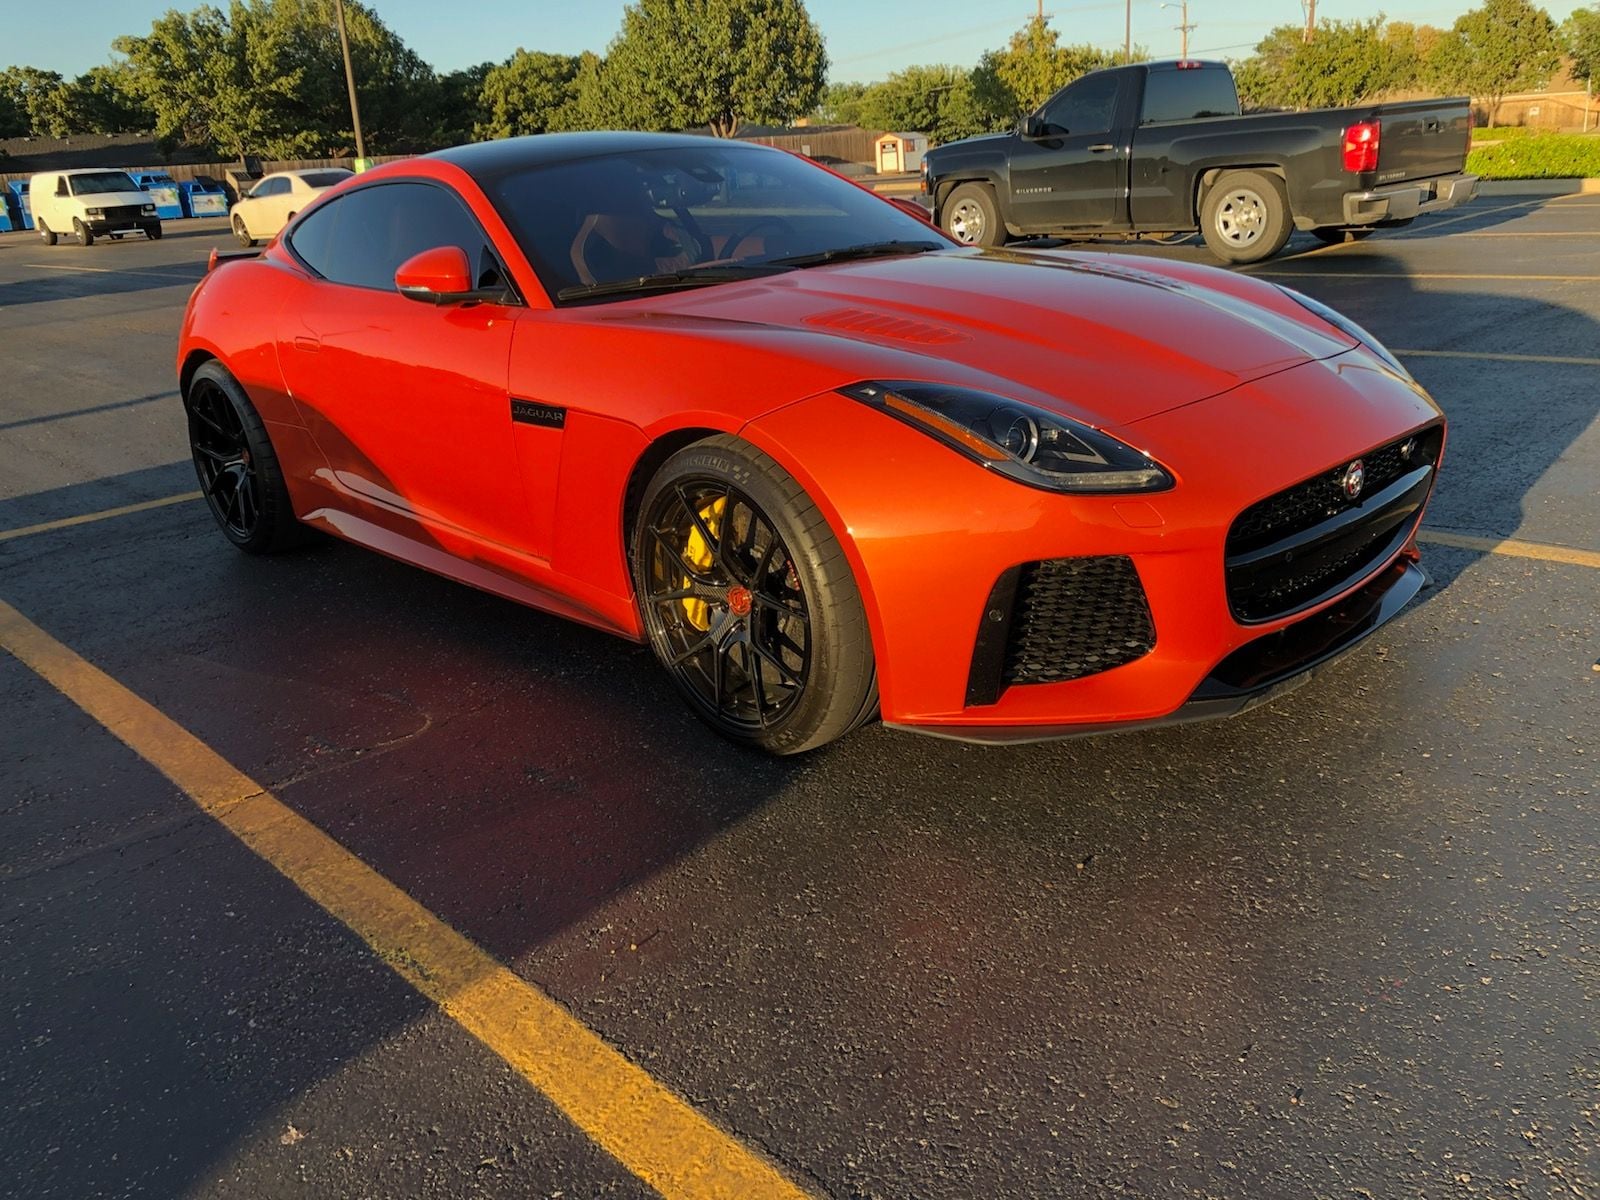 Wheels and Tires/Axles - Strasse Wheels and Pilot Super Sport tires - Used - 2015 to 2019 Jaguar F-Type - Lubbock, TX 79424, United States